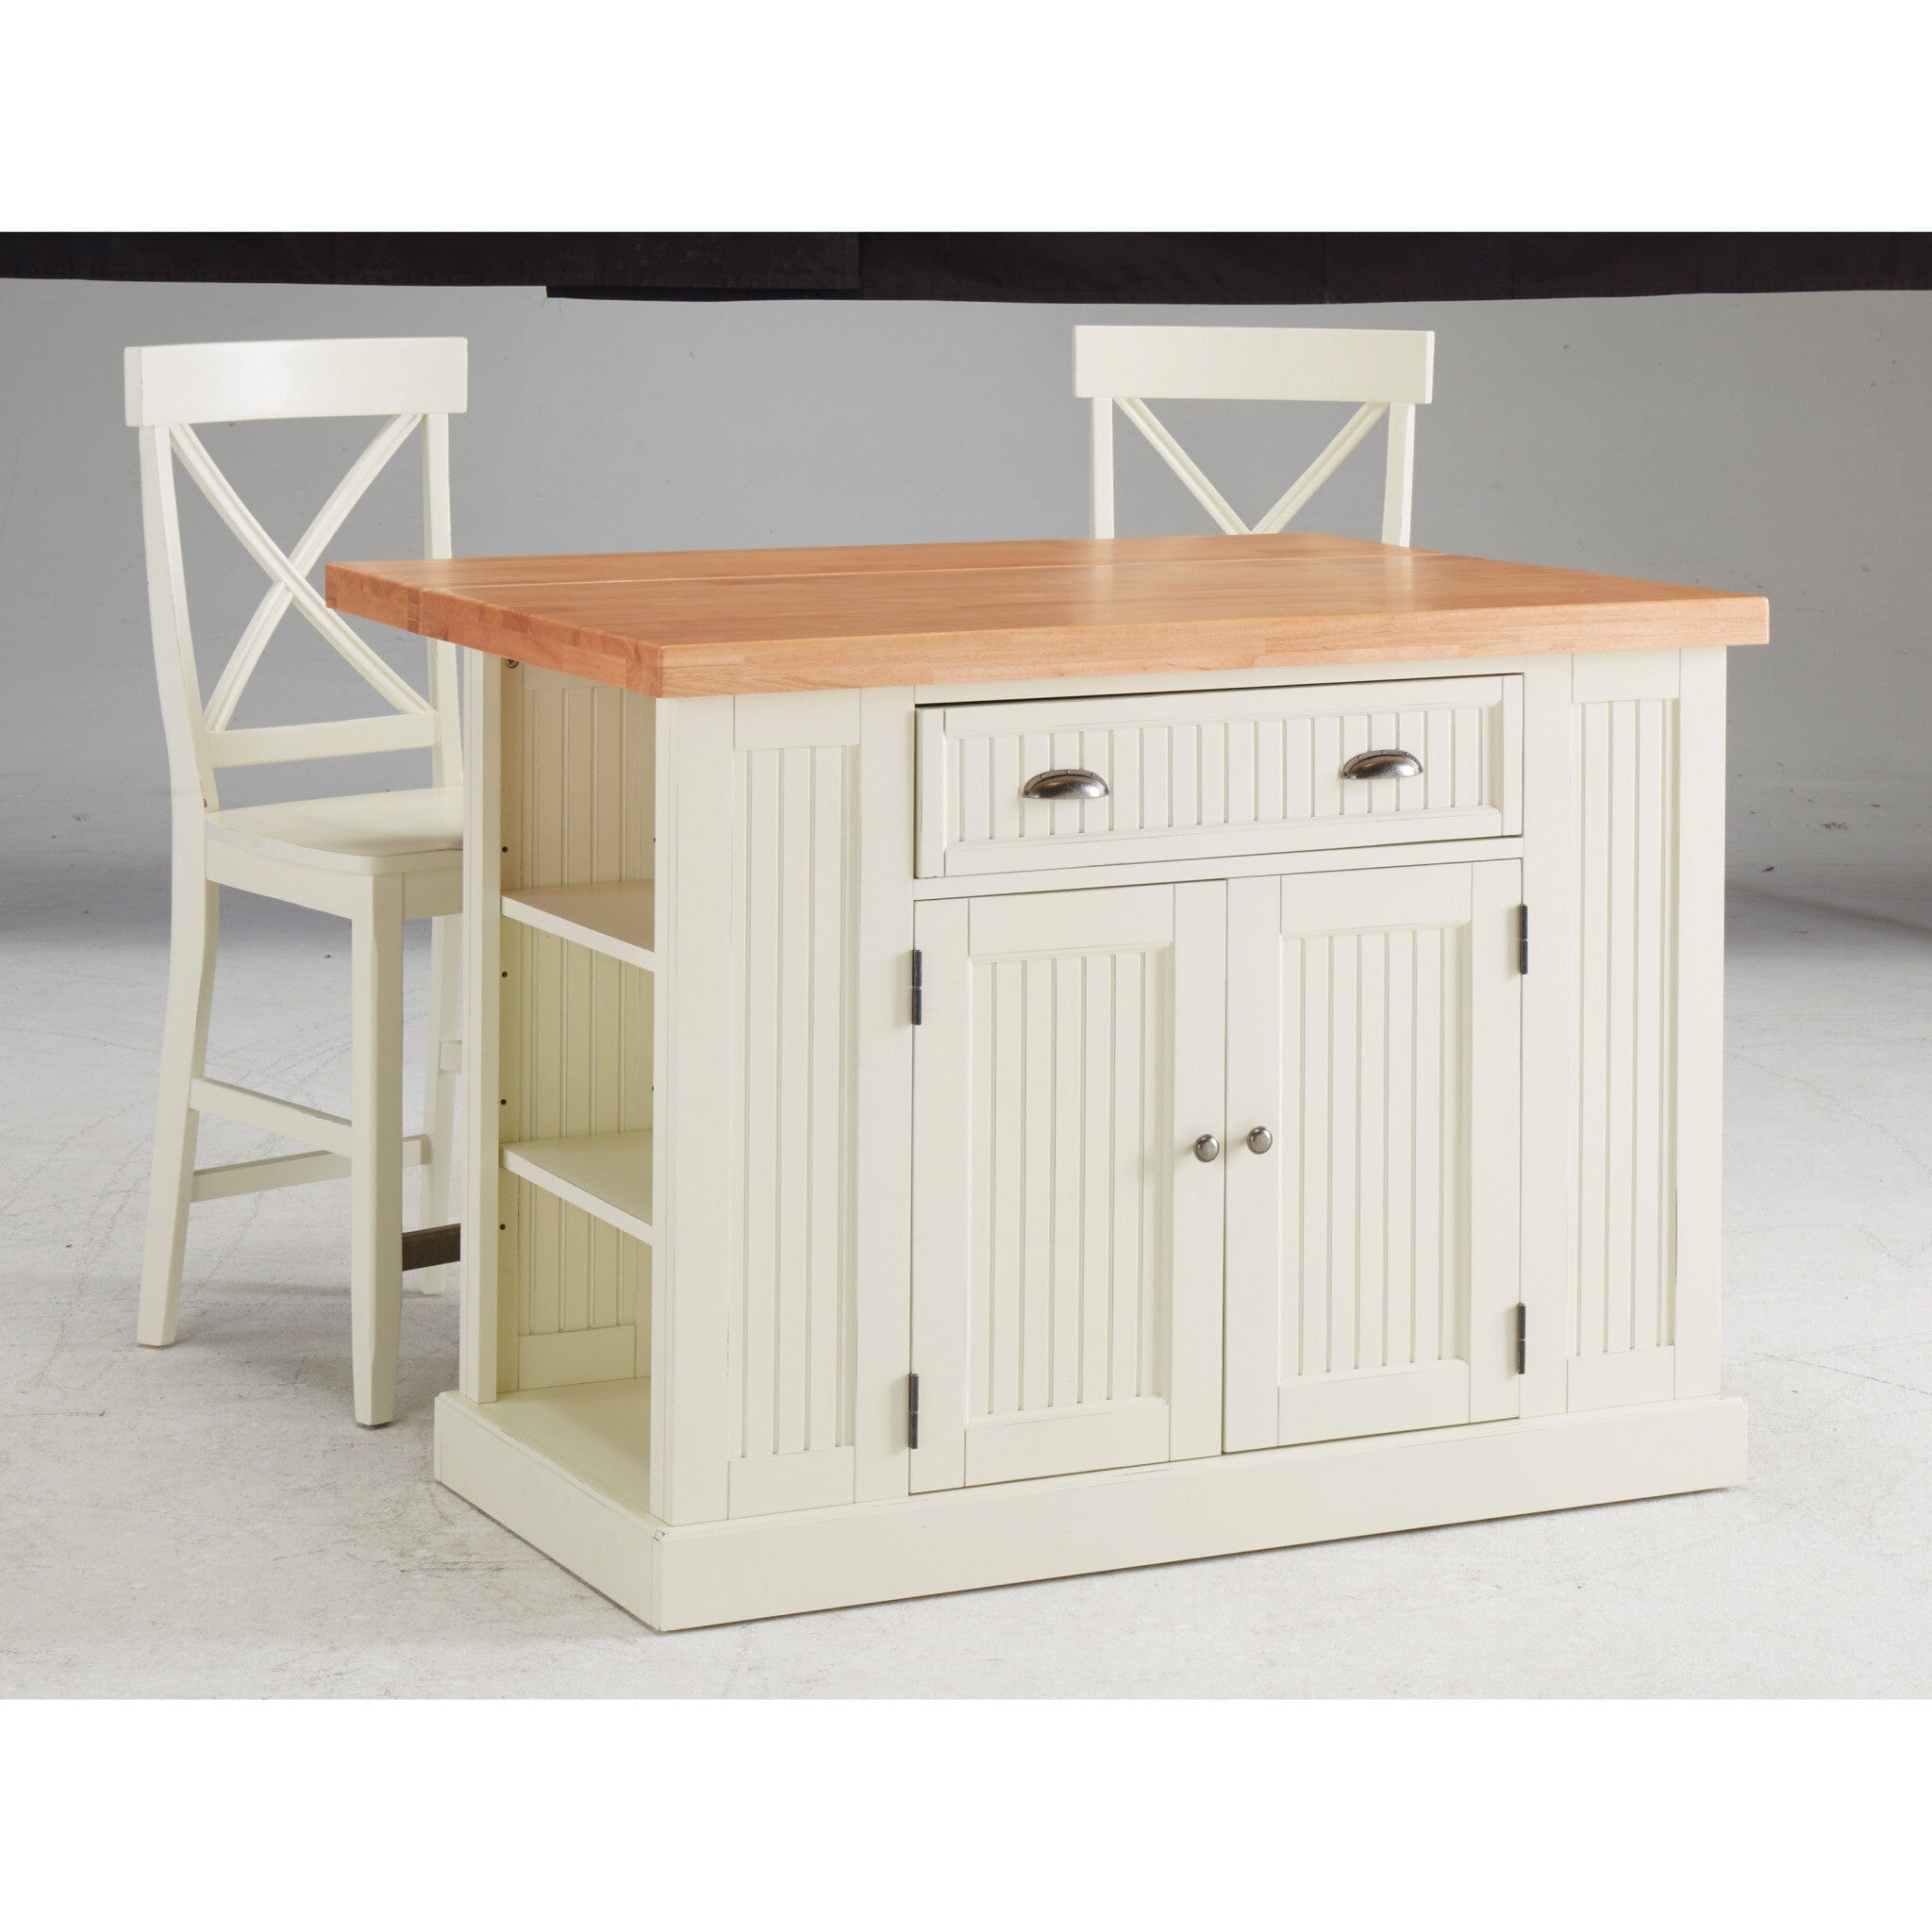 Traditional 3 Piece Kitchen Island Set By Nantucket Kitchen Island Nantucket